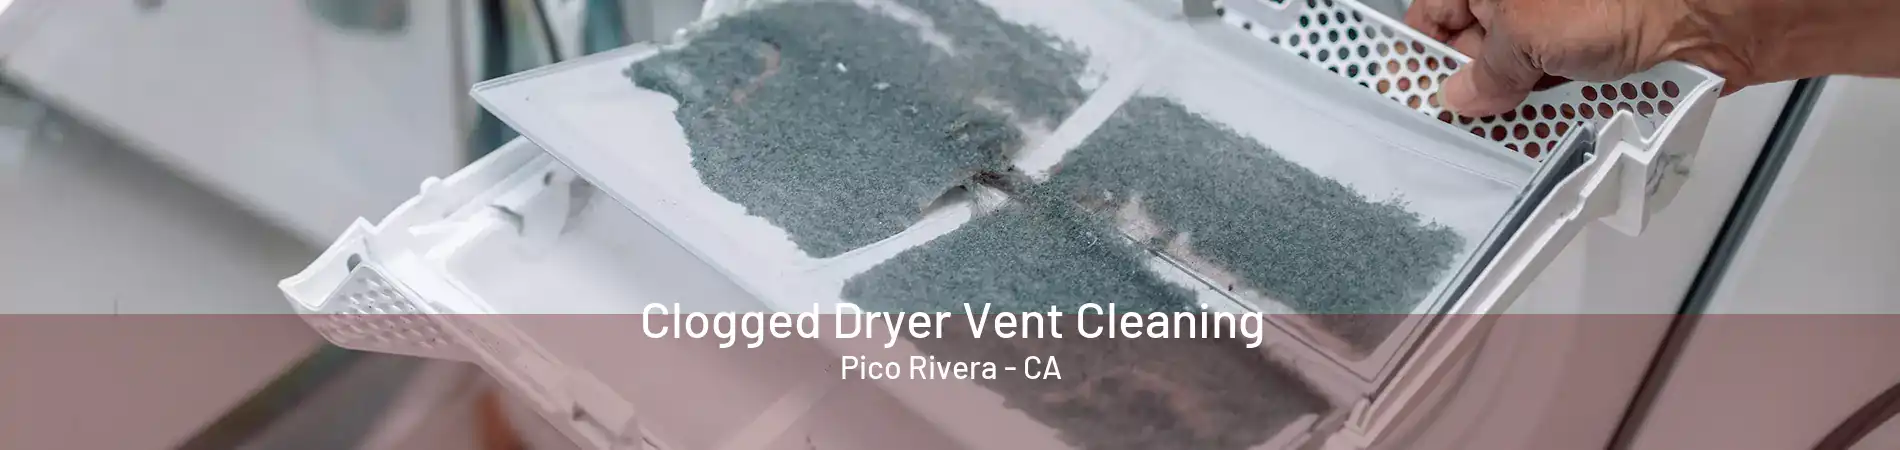 Clogged Dryer Vent Cleaning Pico Rivera - CA